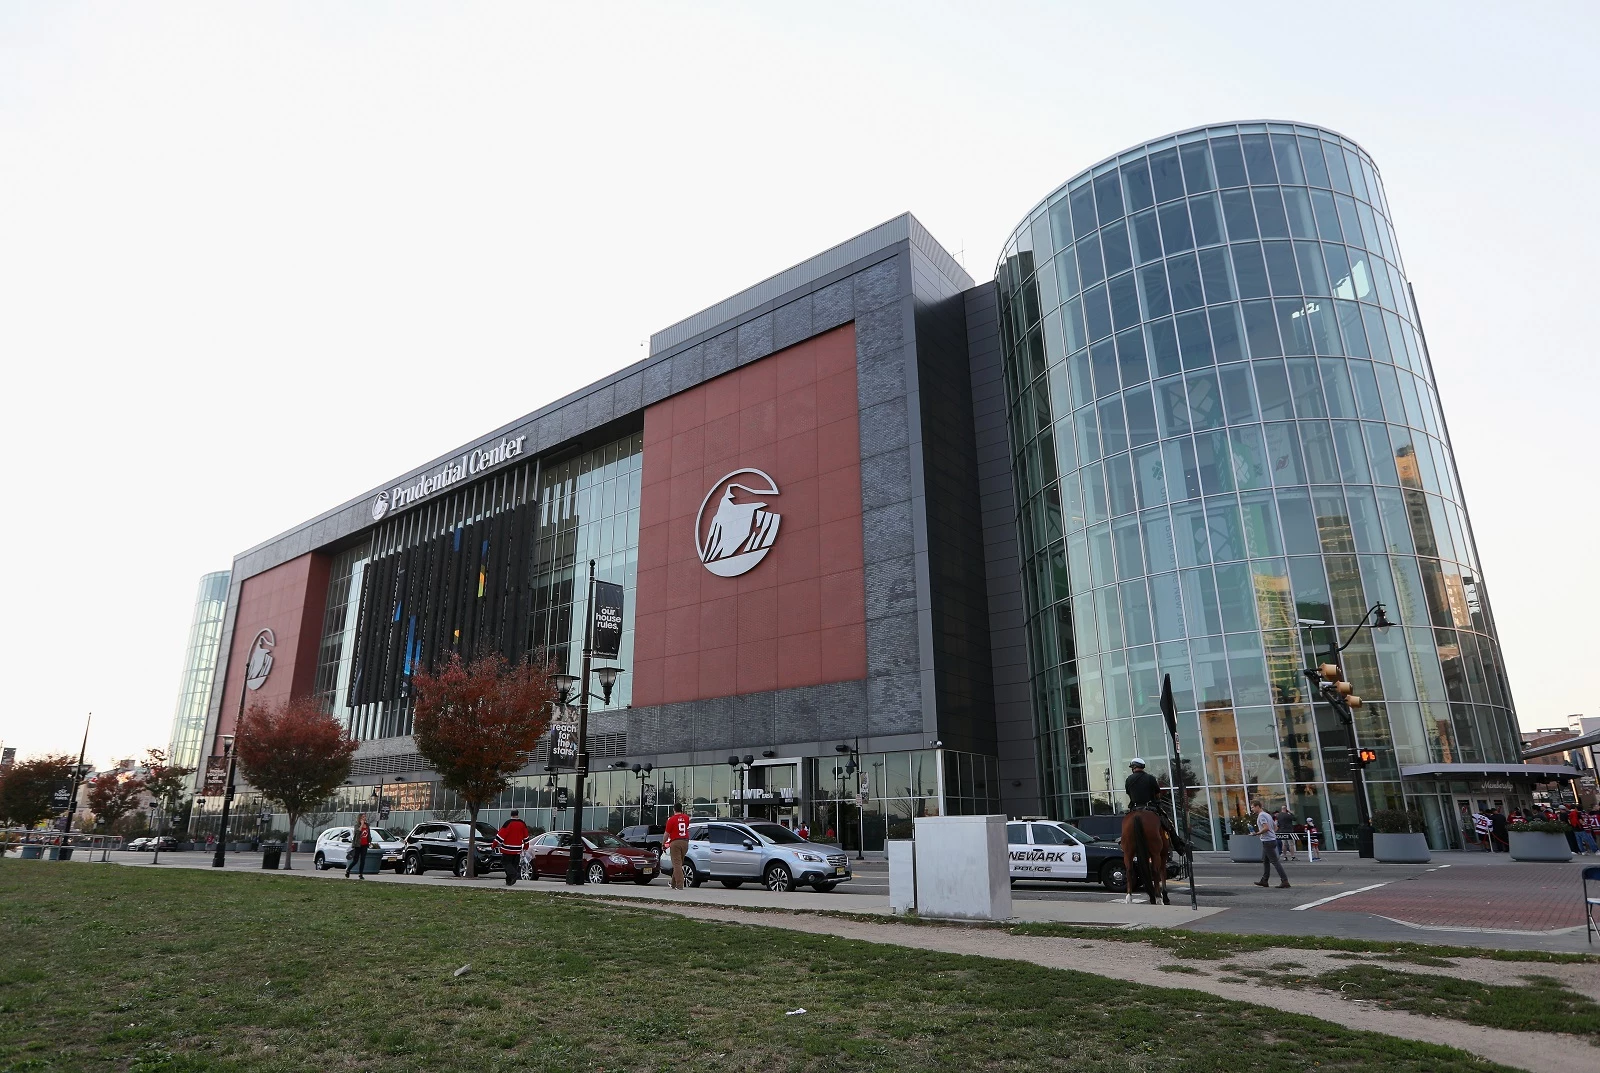 New Jersey Devils fans return to Prudential Center with safety precautions